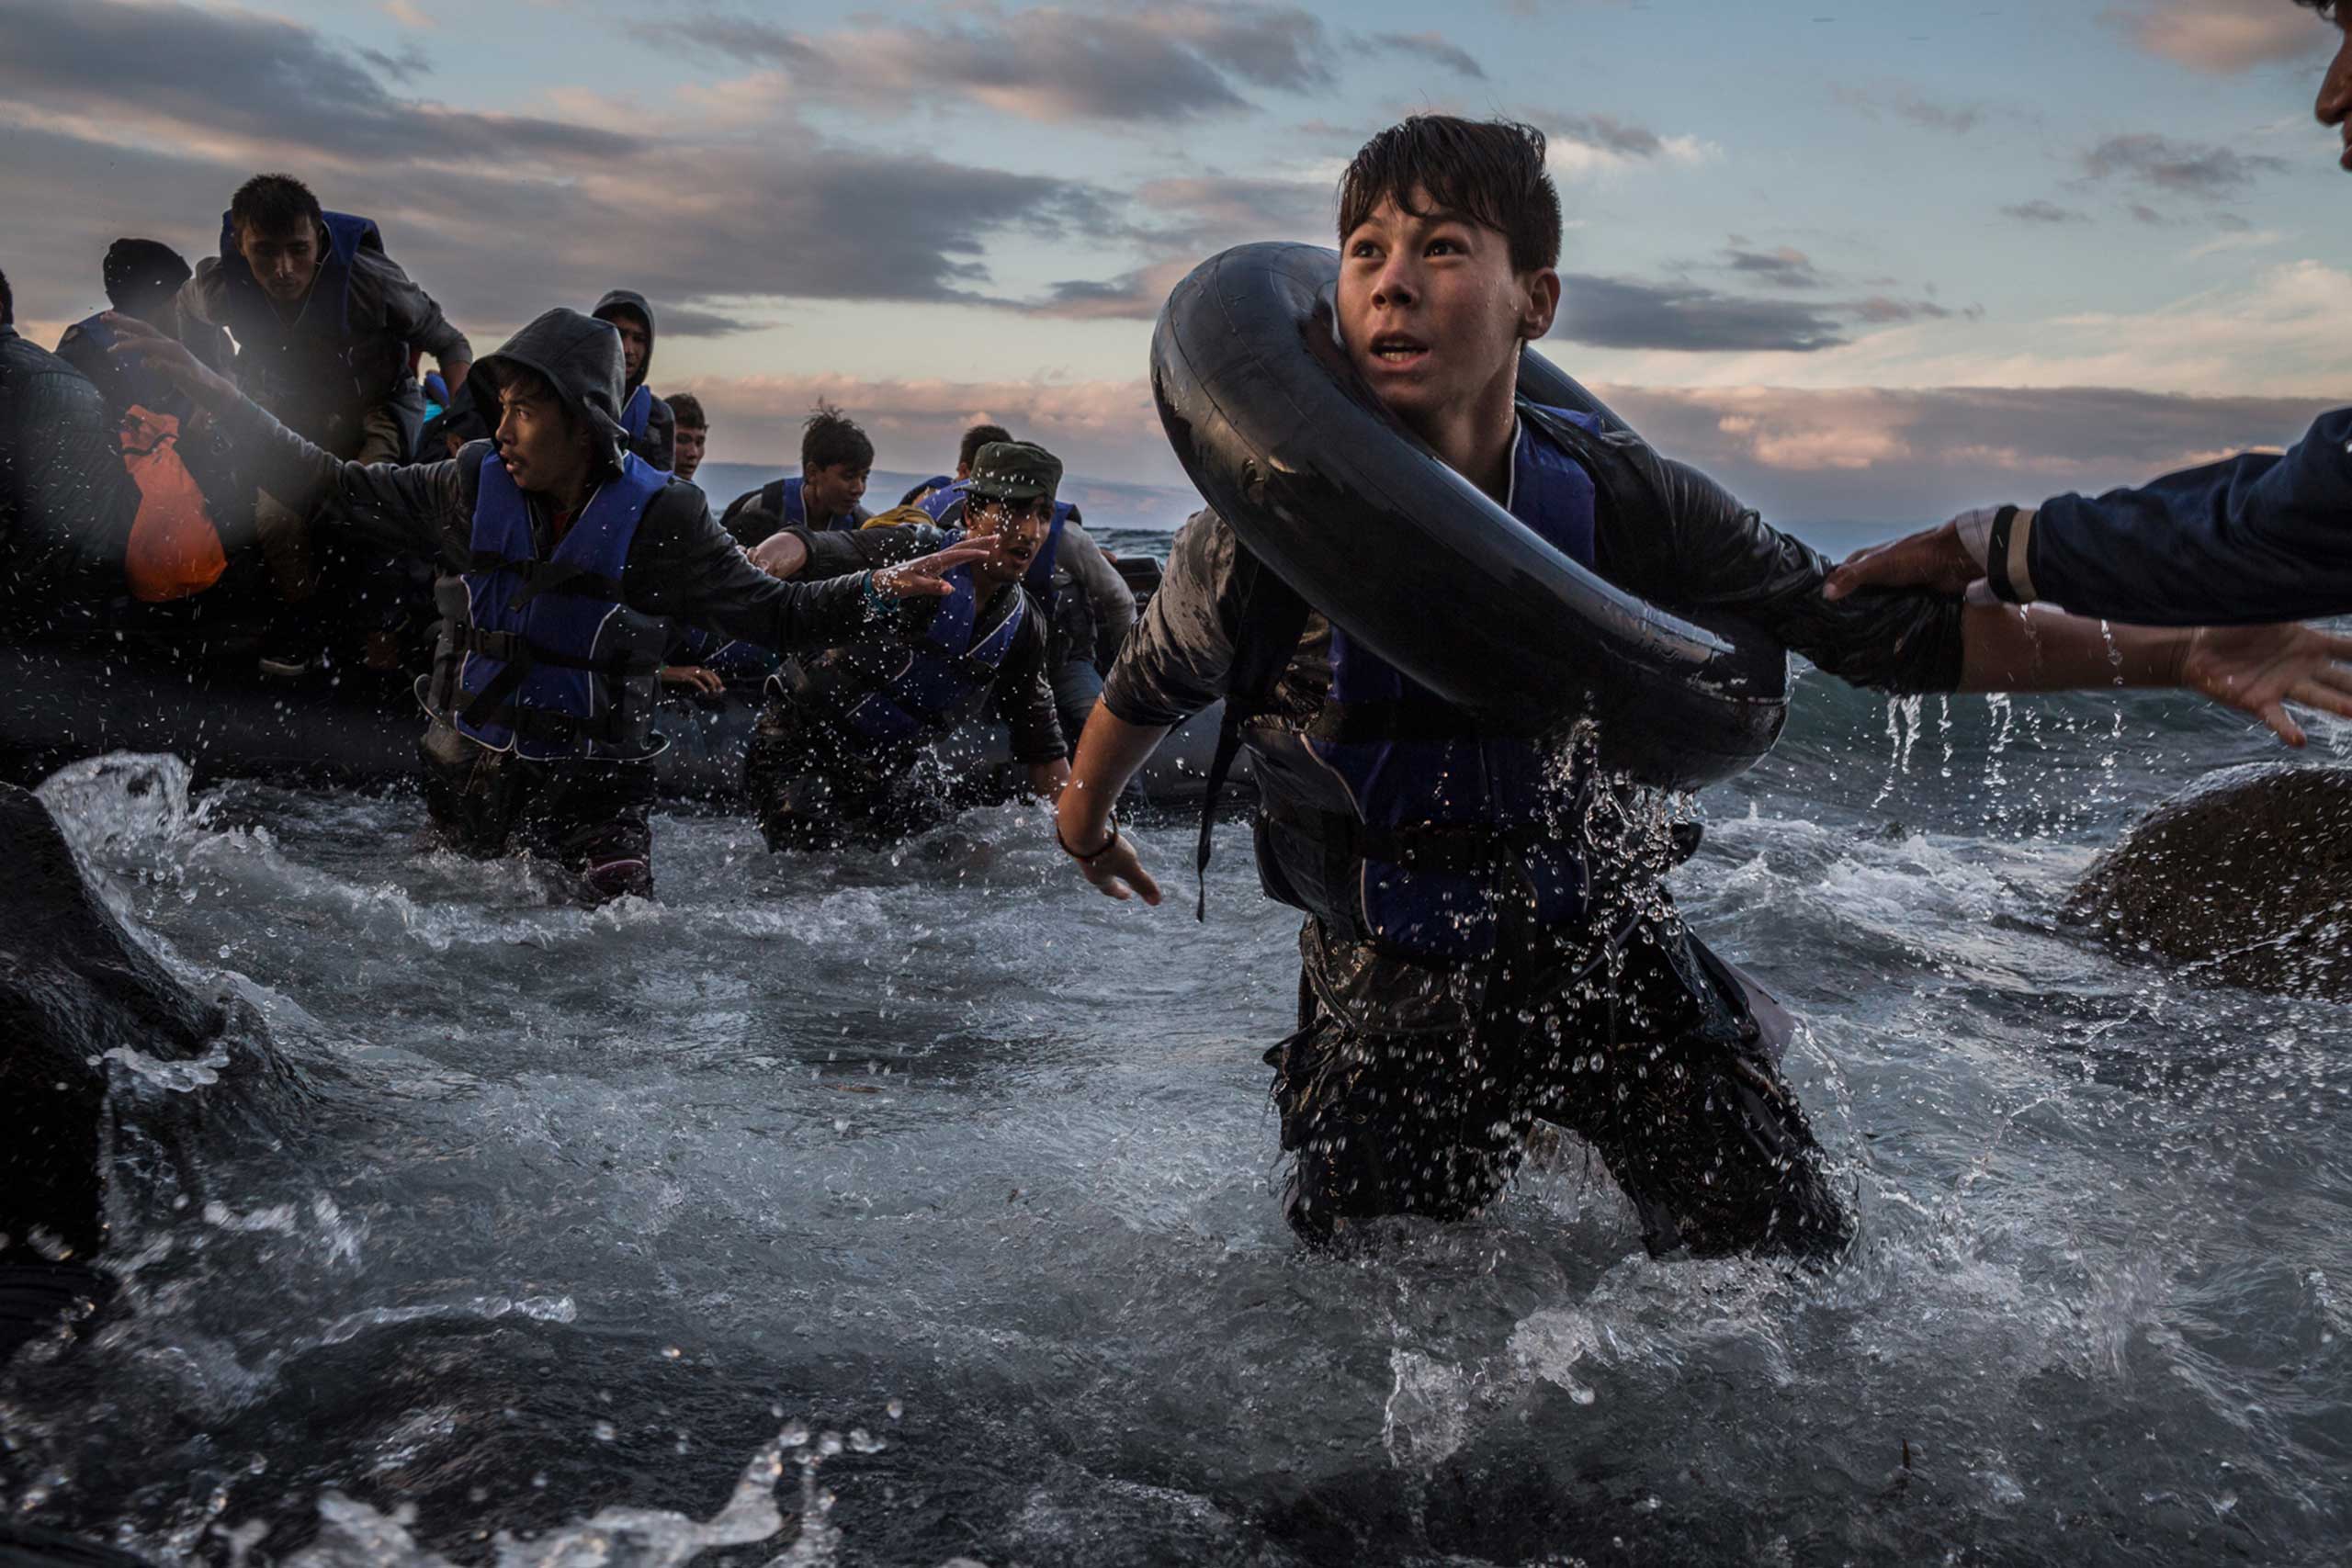 After battling rough seas and high winds from Turkey, migrants arrive by rubber raft on a jagged shoreline of the Greek island of Lesbos. Fearing capsize or puncture, some panicked and jumped into the cold water in desperation to reach land. This young boy made it, unlike hundreds of others. Oct. 1, 2015.